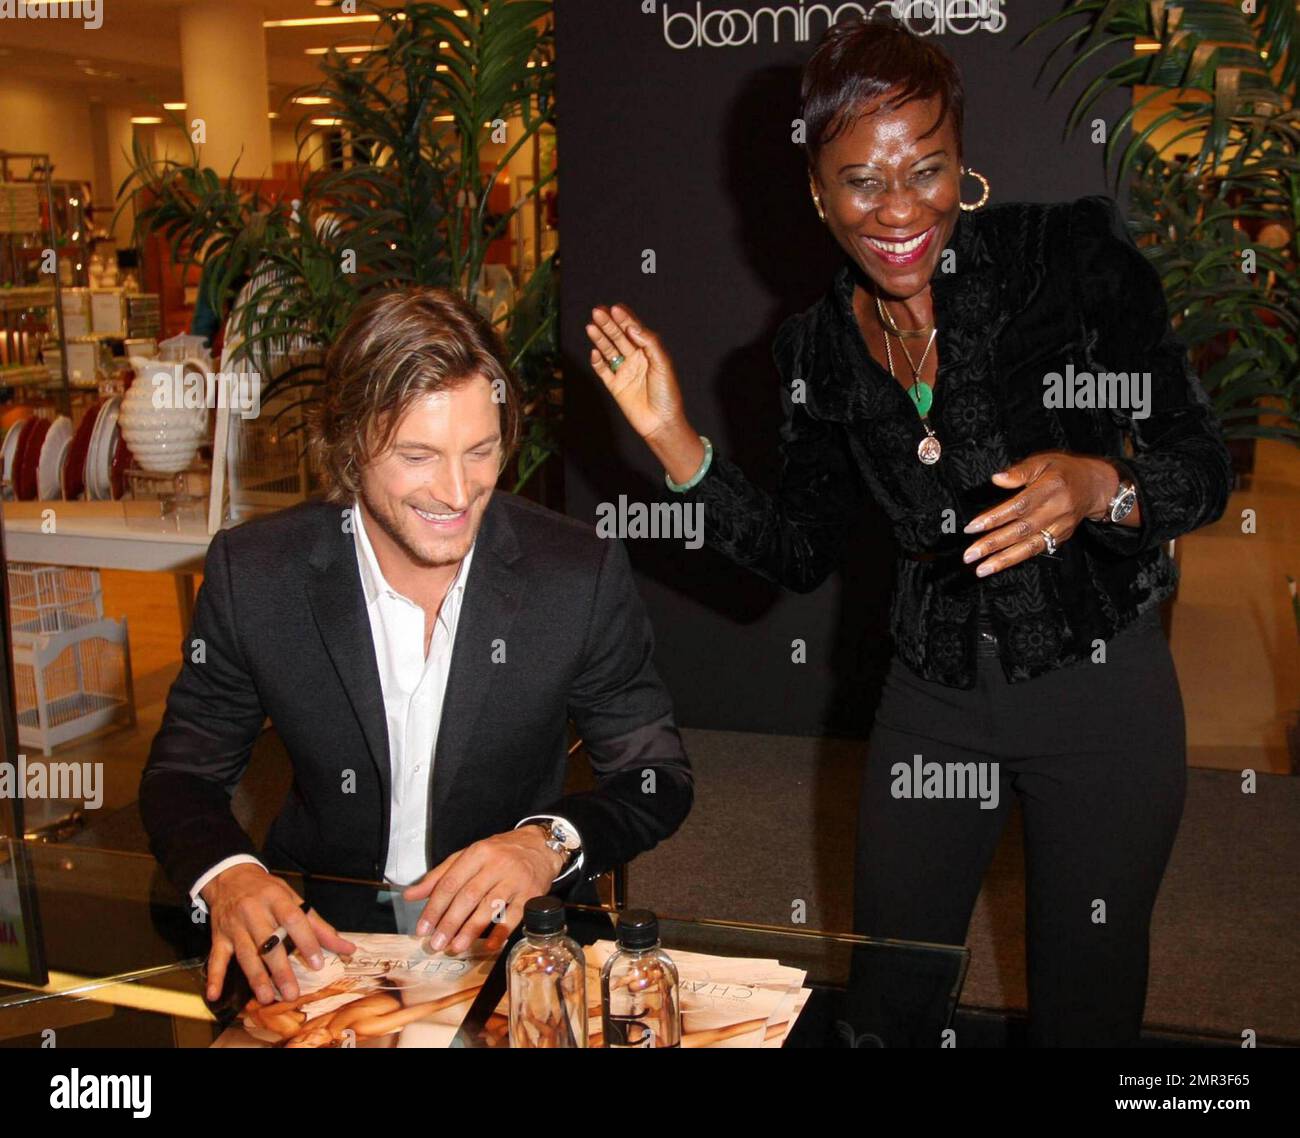 Gabriel Aubry, Montreal-born model and spokesperson for the home collection  Charisma, appears at Bloomingdale's in Century City Mall to promote  Charisma and sign autographs for fans. Aubry, who has a daughter with